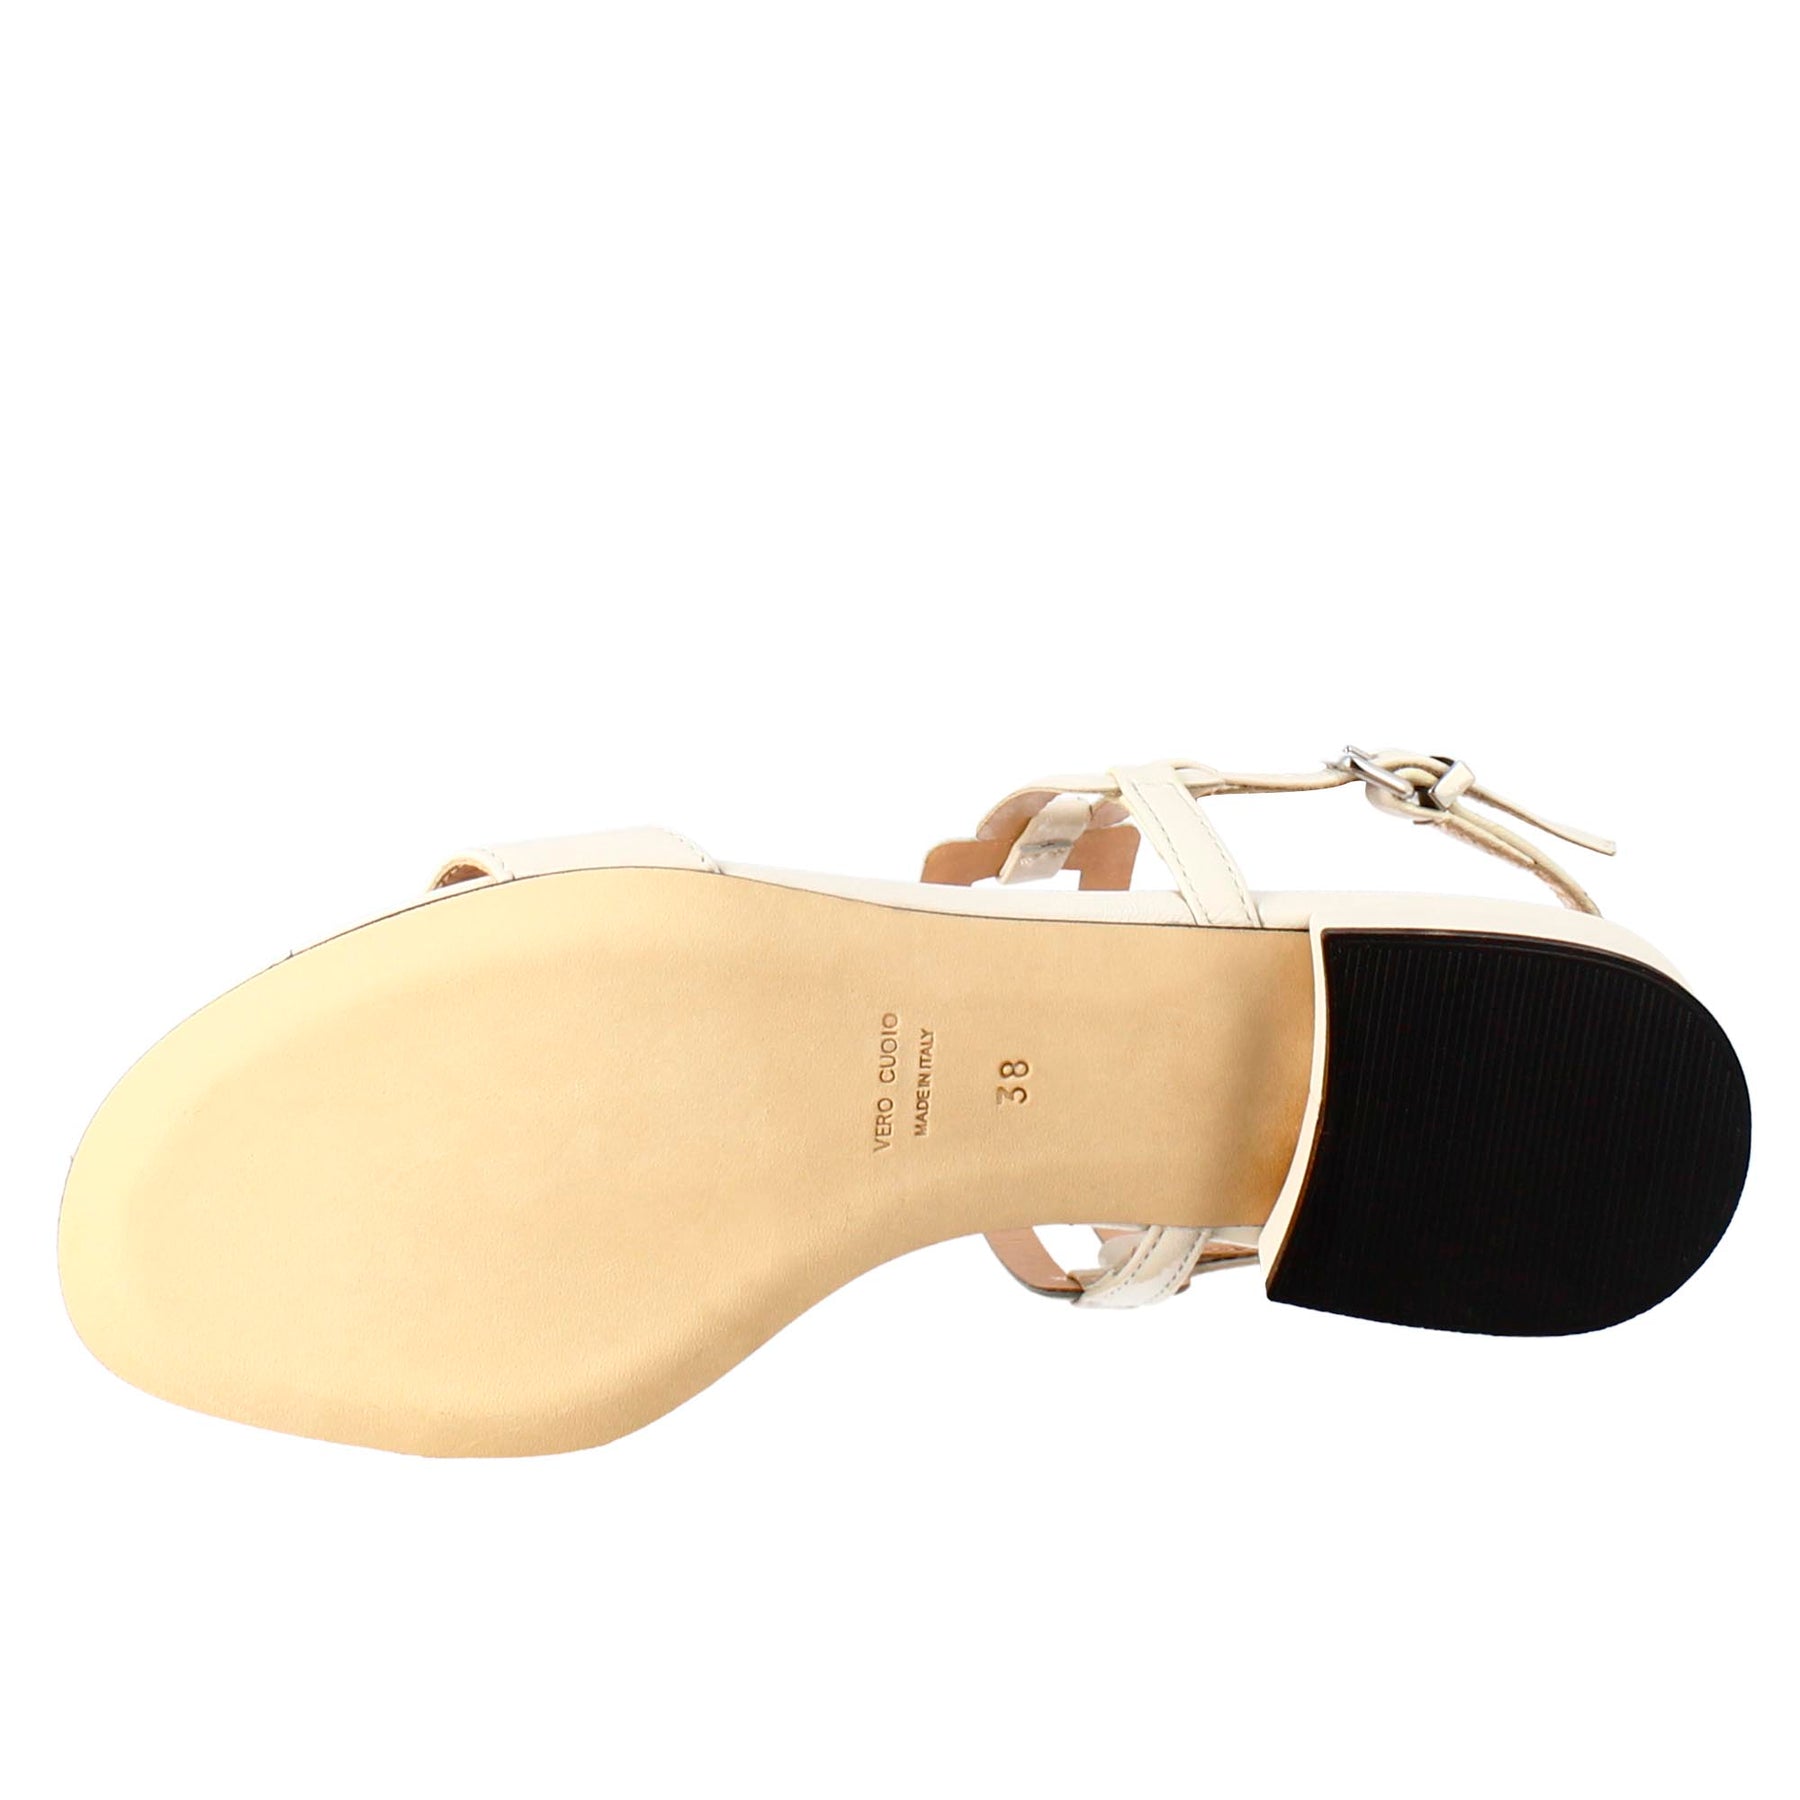 Woman's open sandal with low heel in cream leather